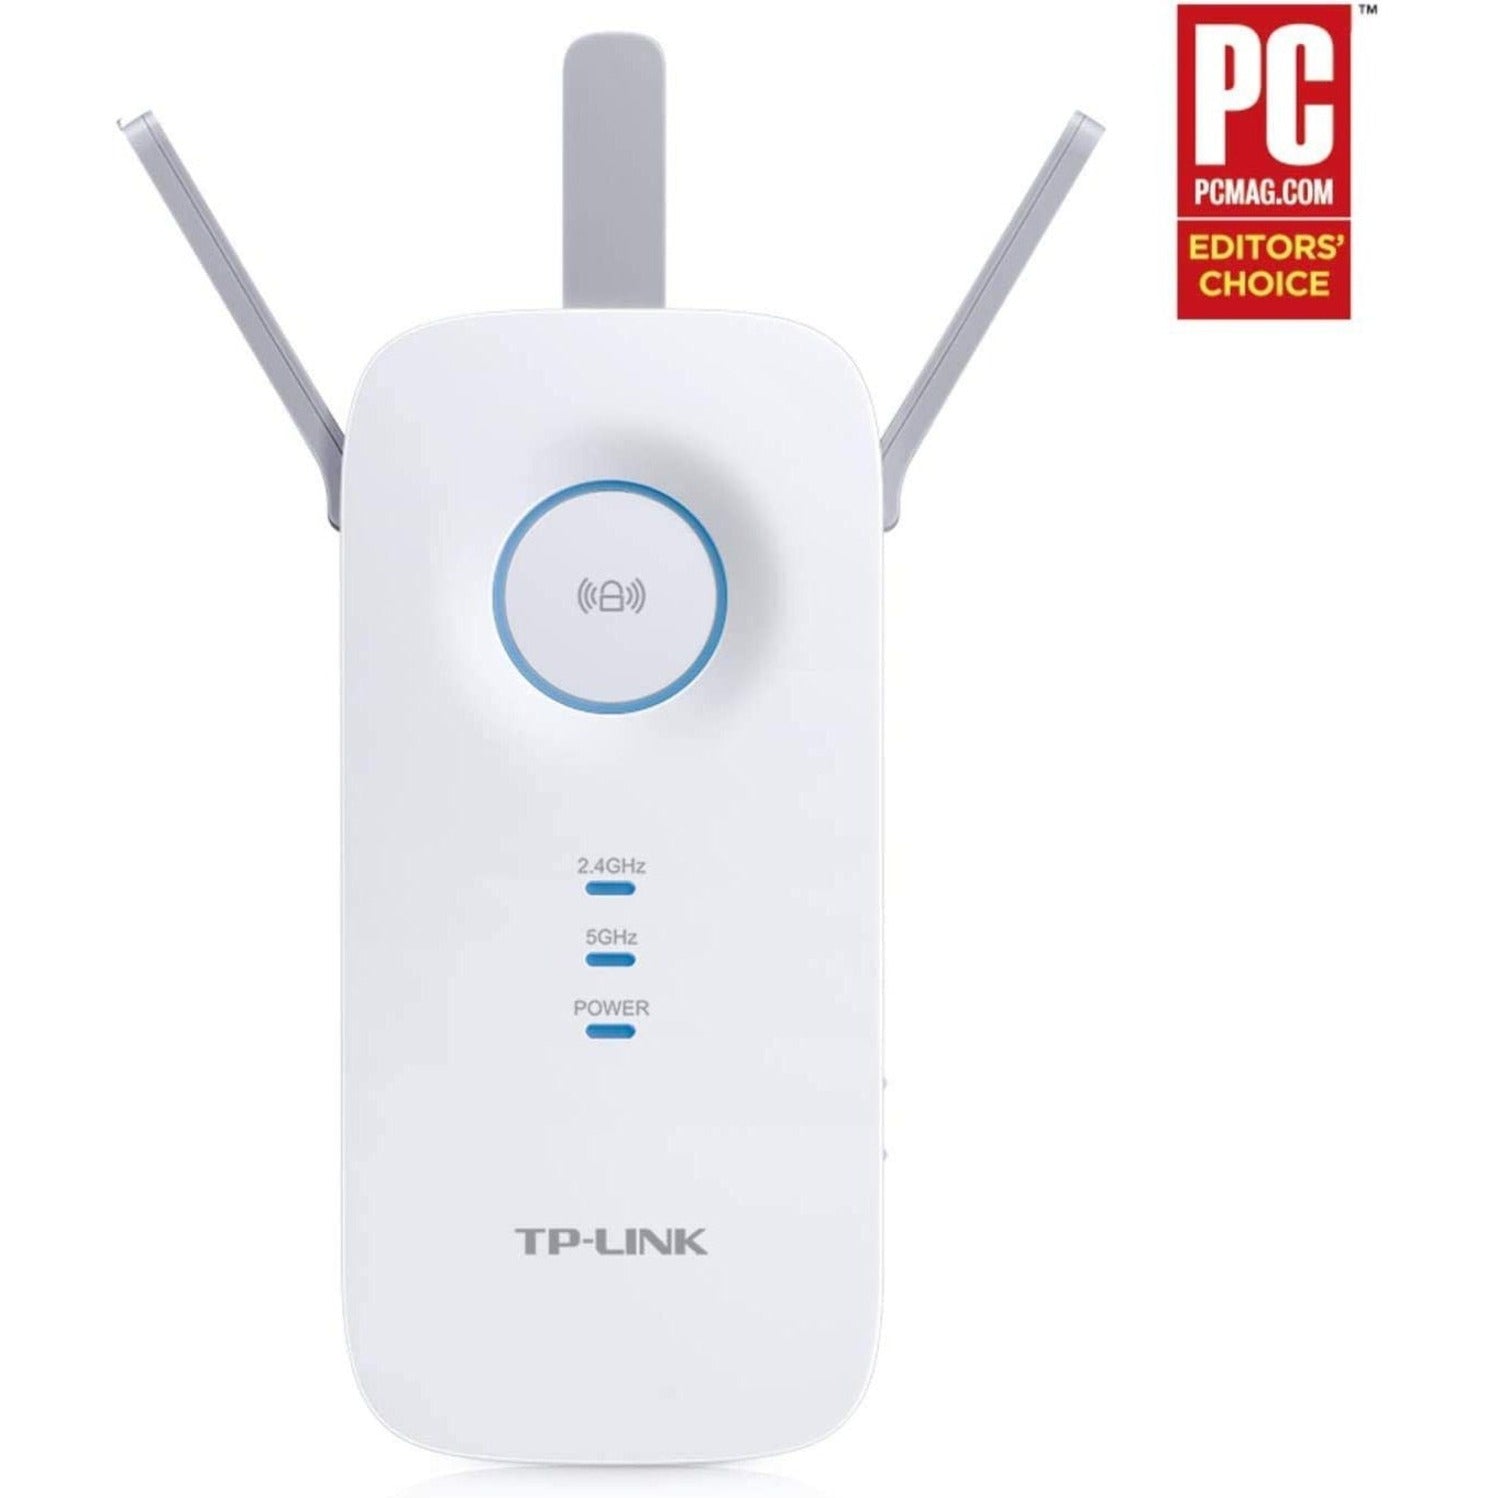 TP-Link AC1750 Wi-Fi Range Extender - Extend Your Wireless Network Coverage [Discontinued]